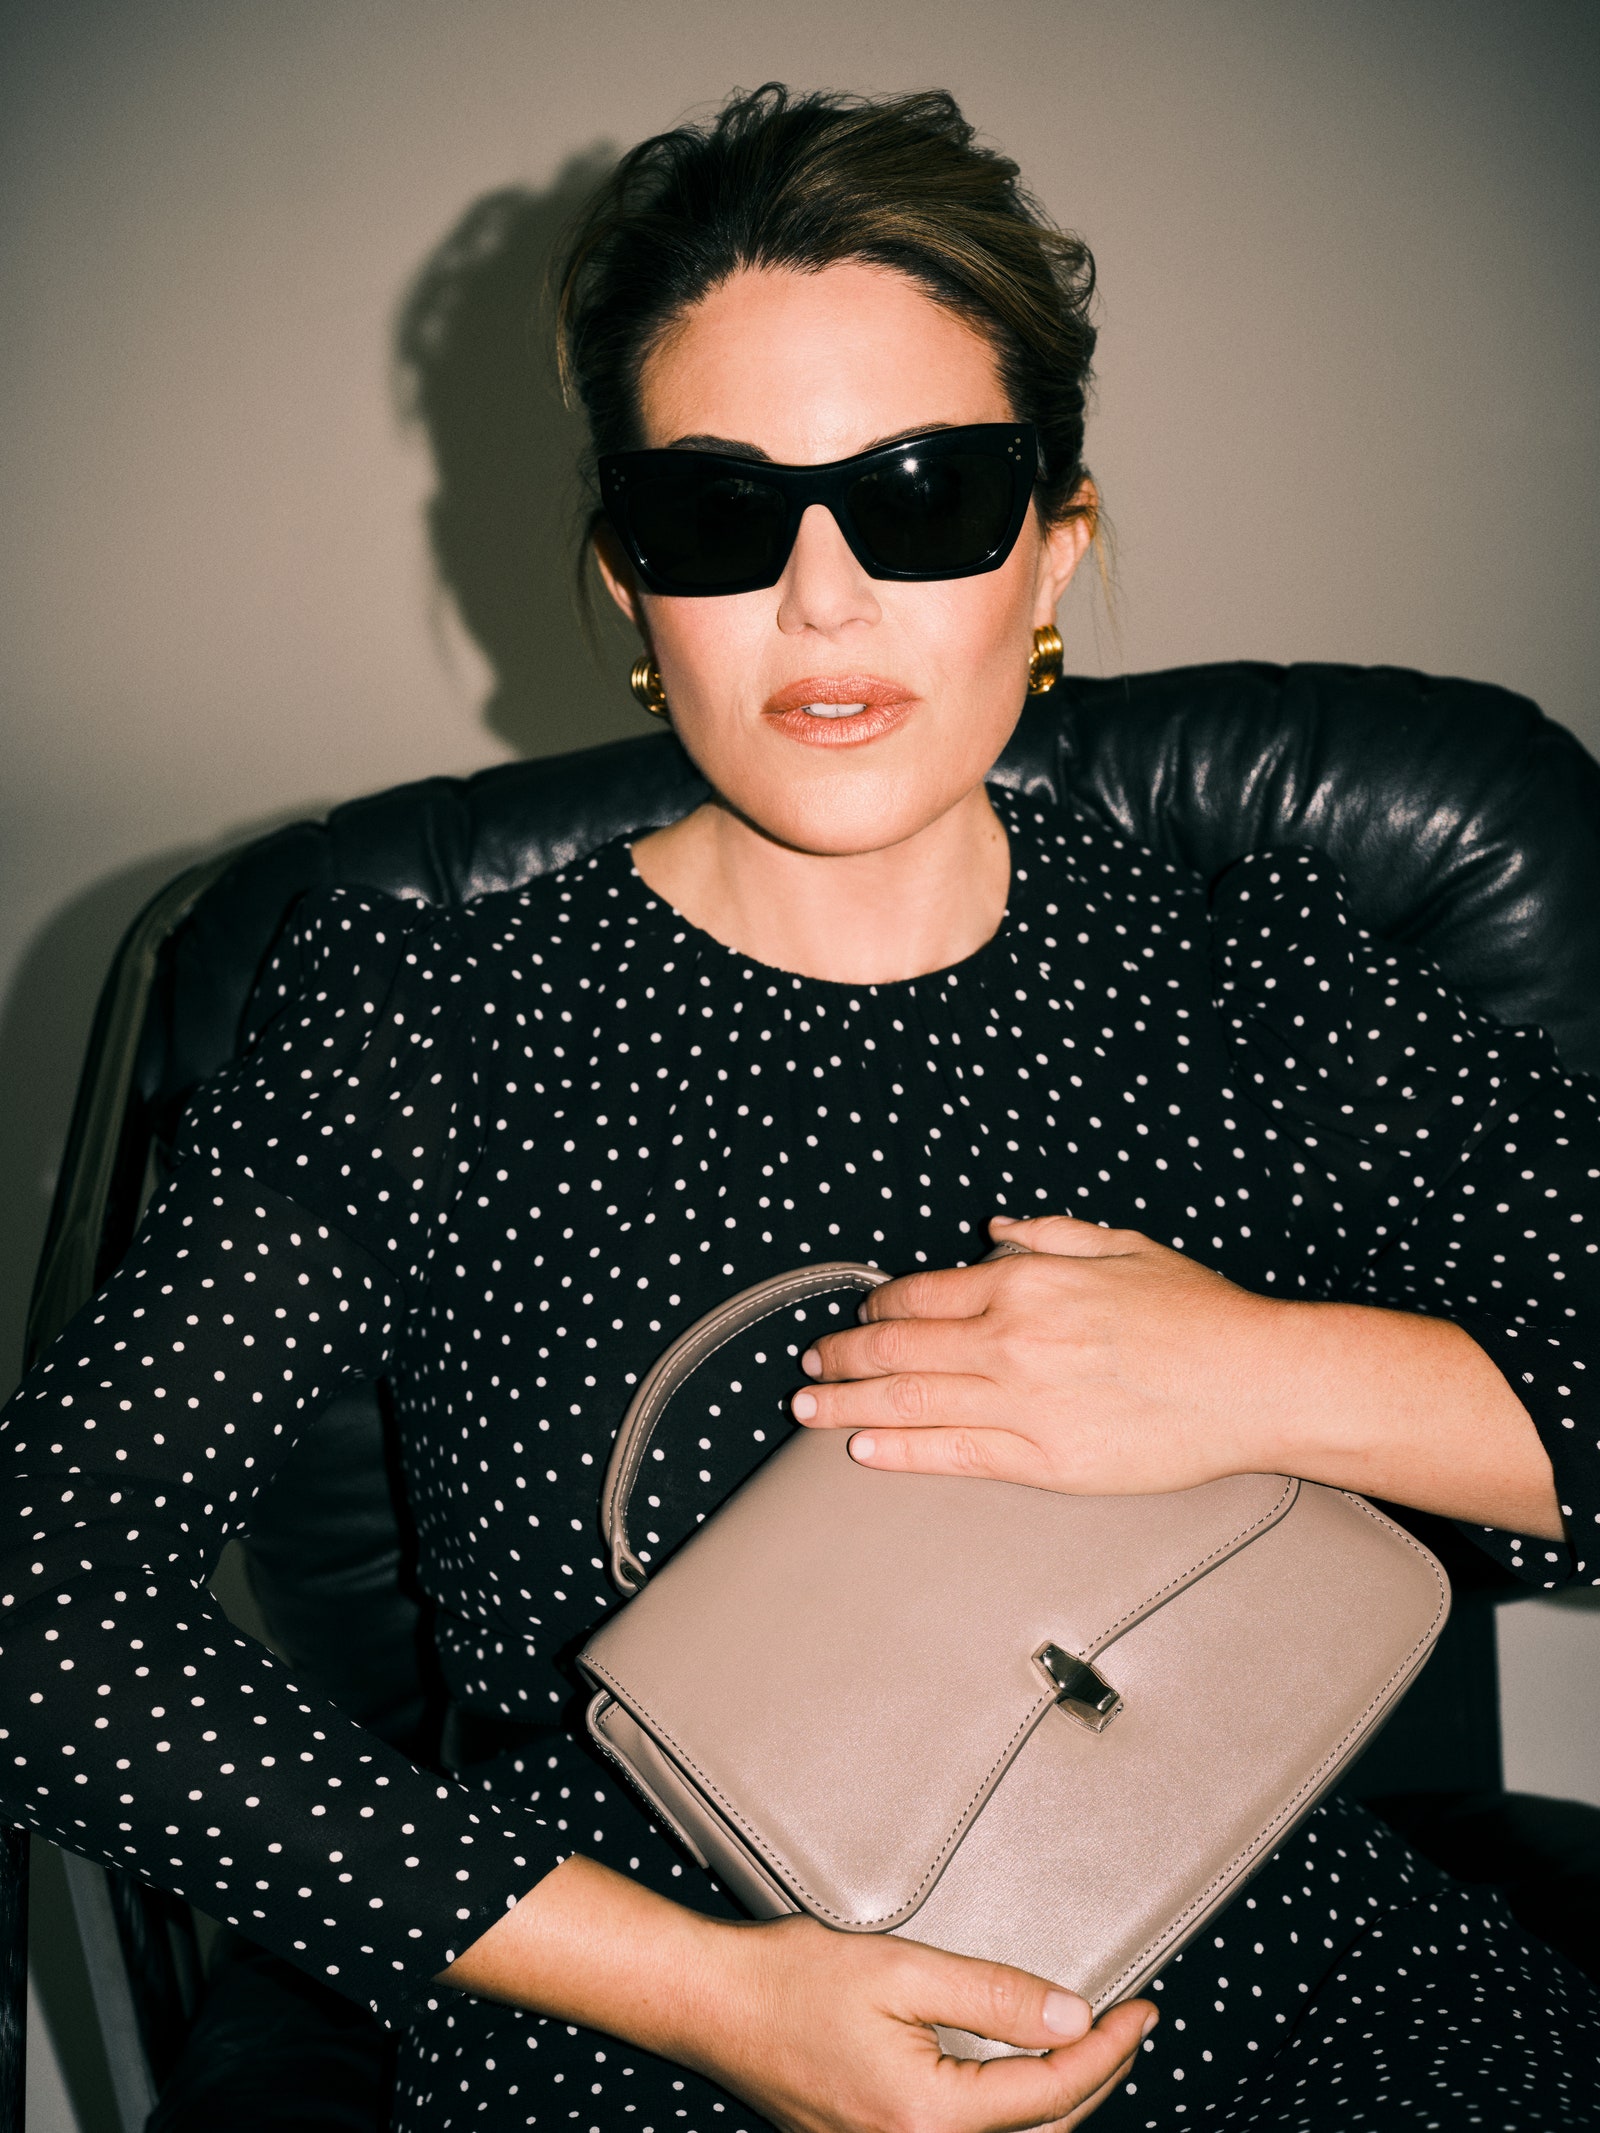 Image may contain Accessories Bag Handbag Sunglasses Purse Face Head Person Photography Portrait and Adult